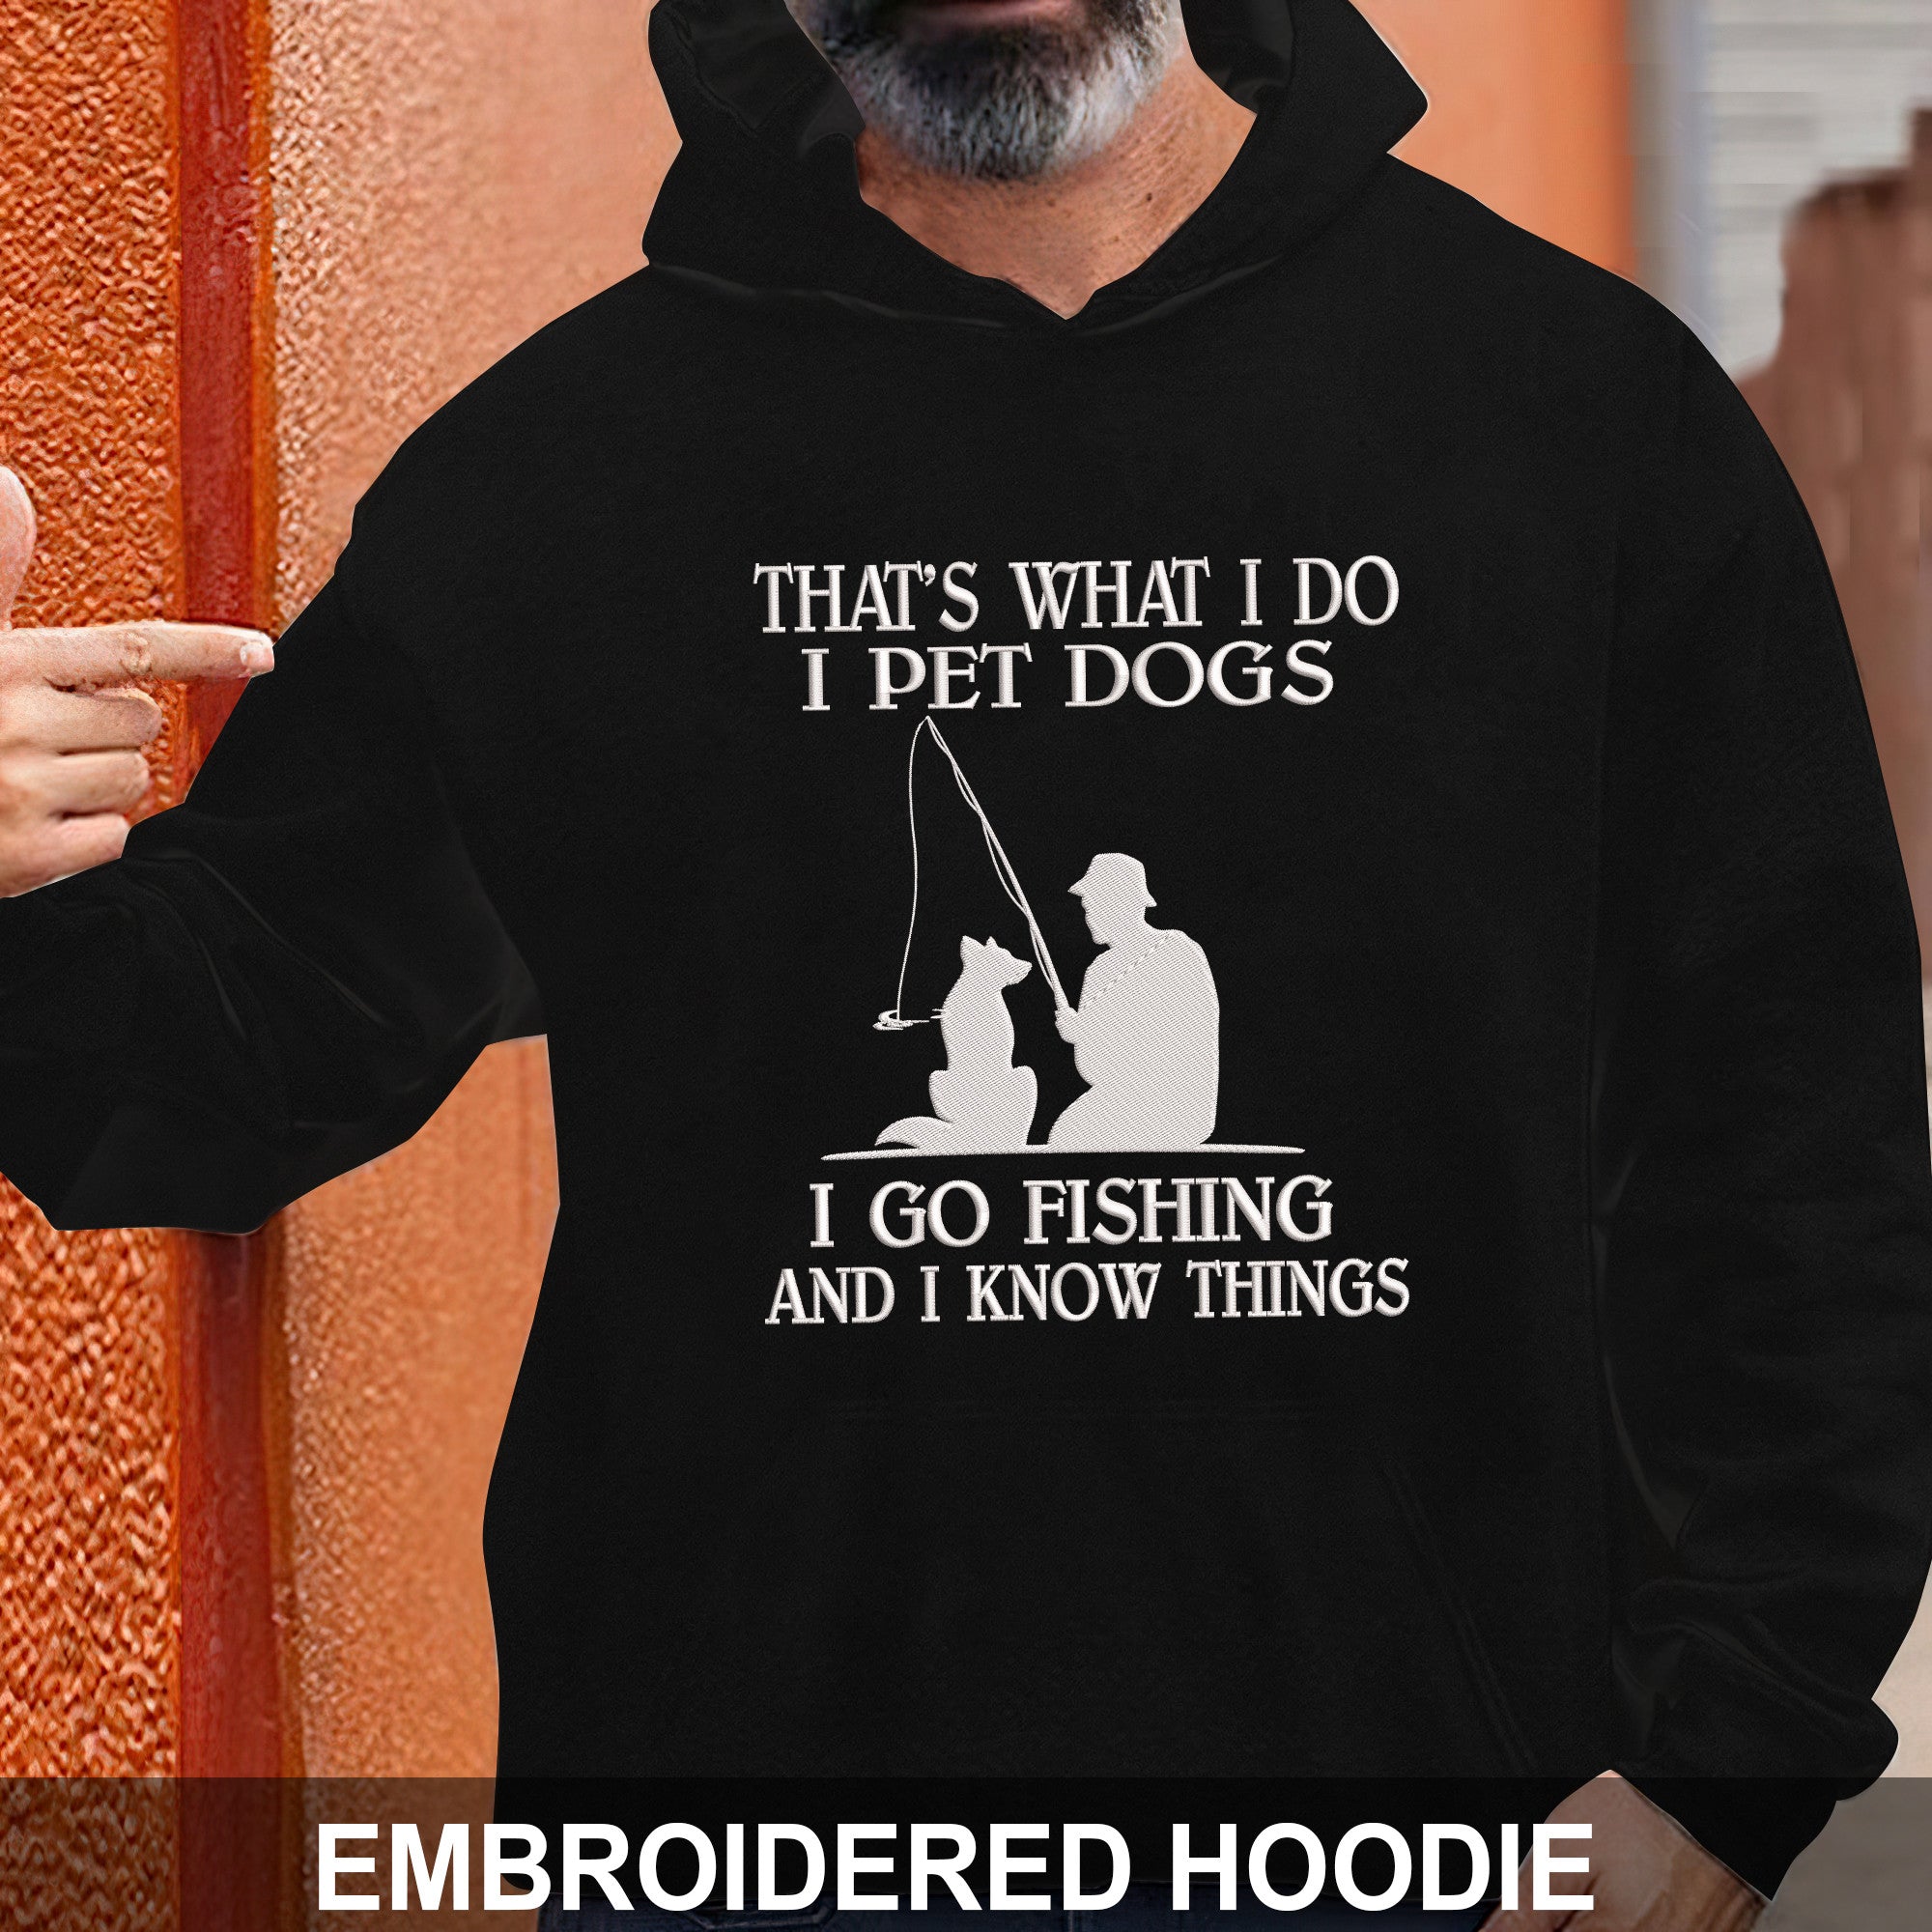 I Pet Dogs I Go Fishing And I Know Things Embroidered Tshirt, Sweatshirt, Hoodie